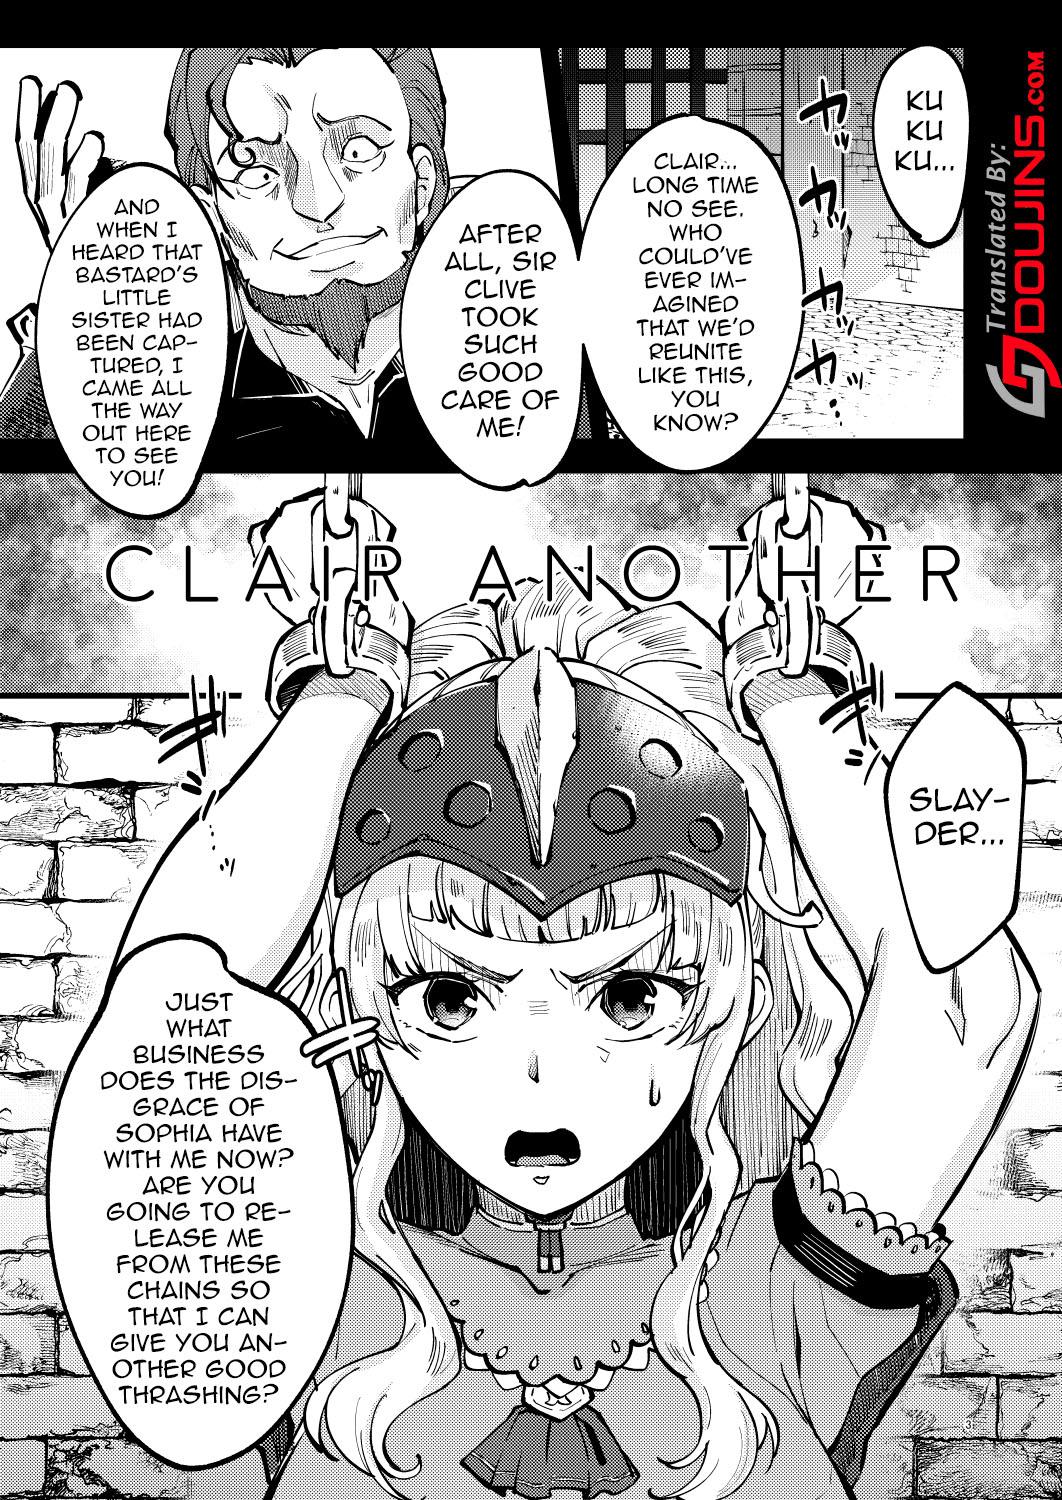 Stepsiblings CLAIR ANOTHER - Fire emblem gaiden Woman - Page 3